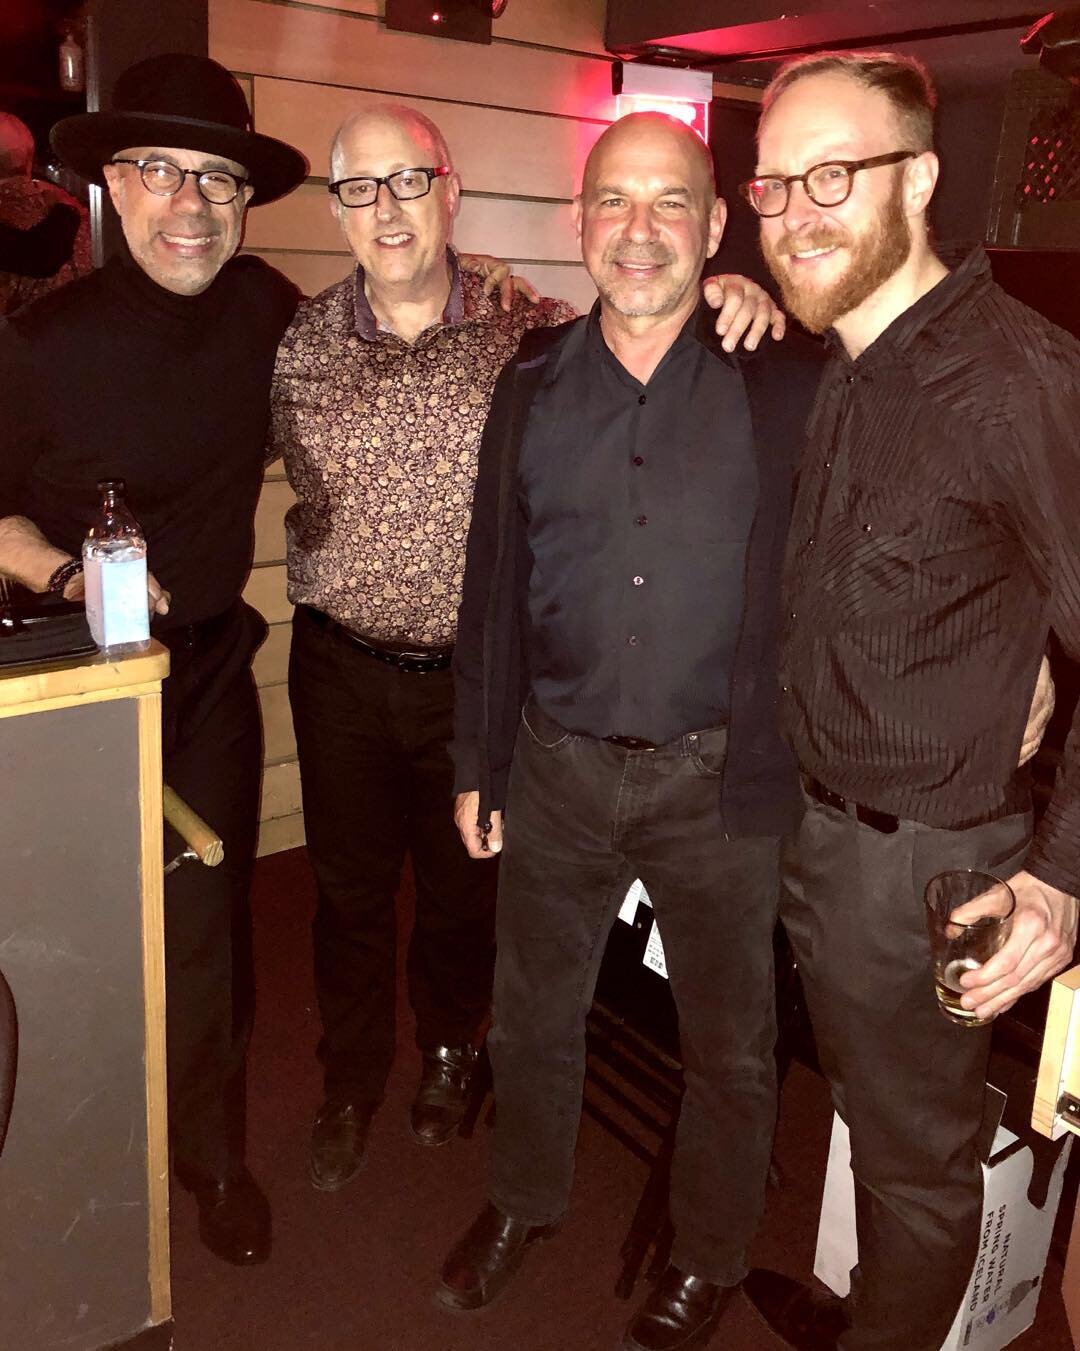 Last night at Ralph Dudley&rsquo;s show at Vibratos with Low end mafia, Oscar Cartaya and Eric Sittner and the Maestro Sandy Stein!